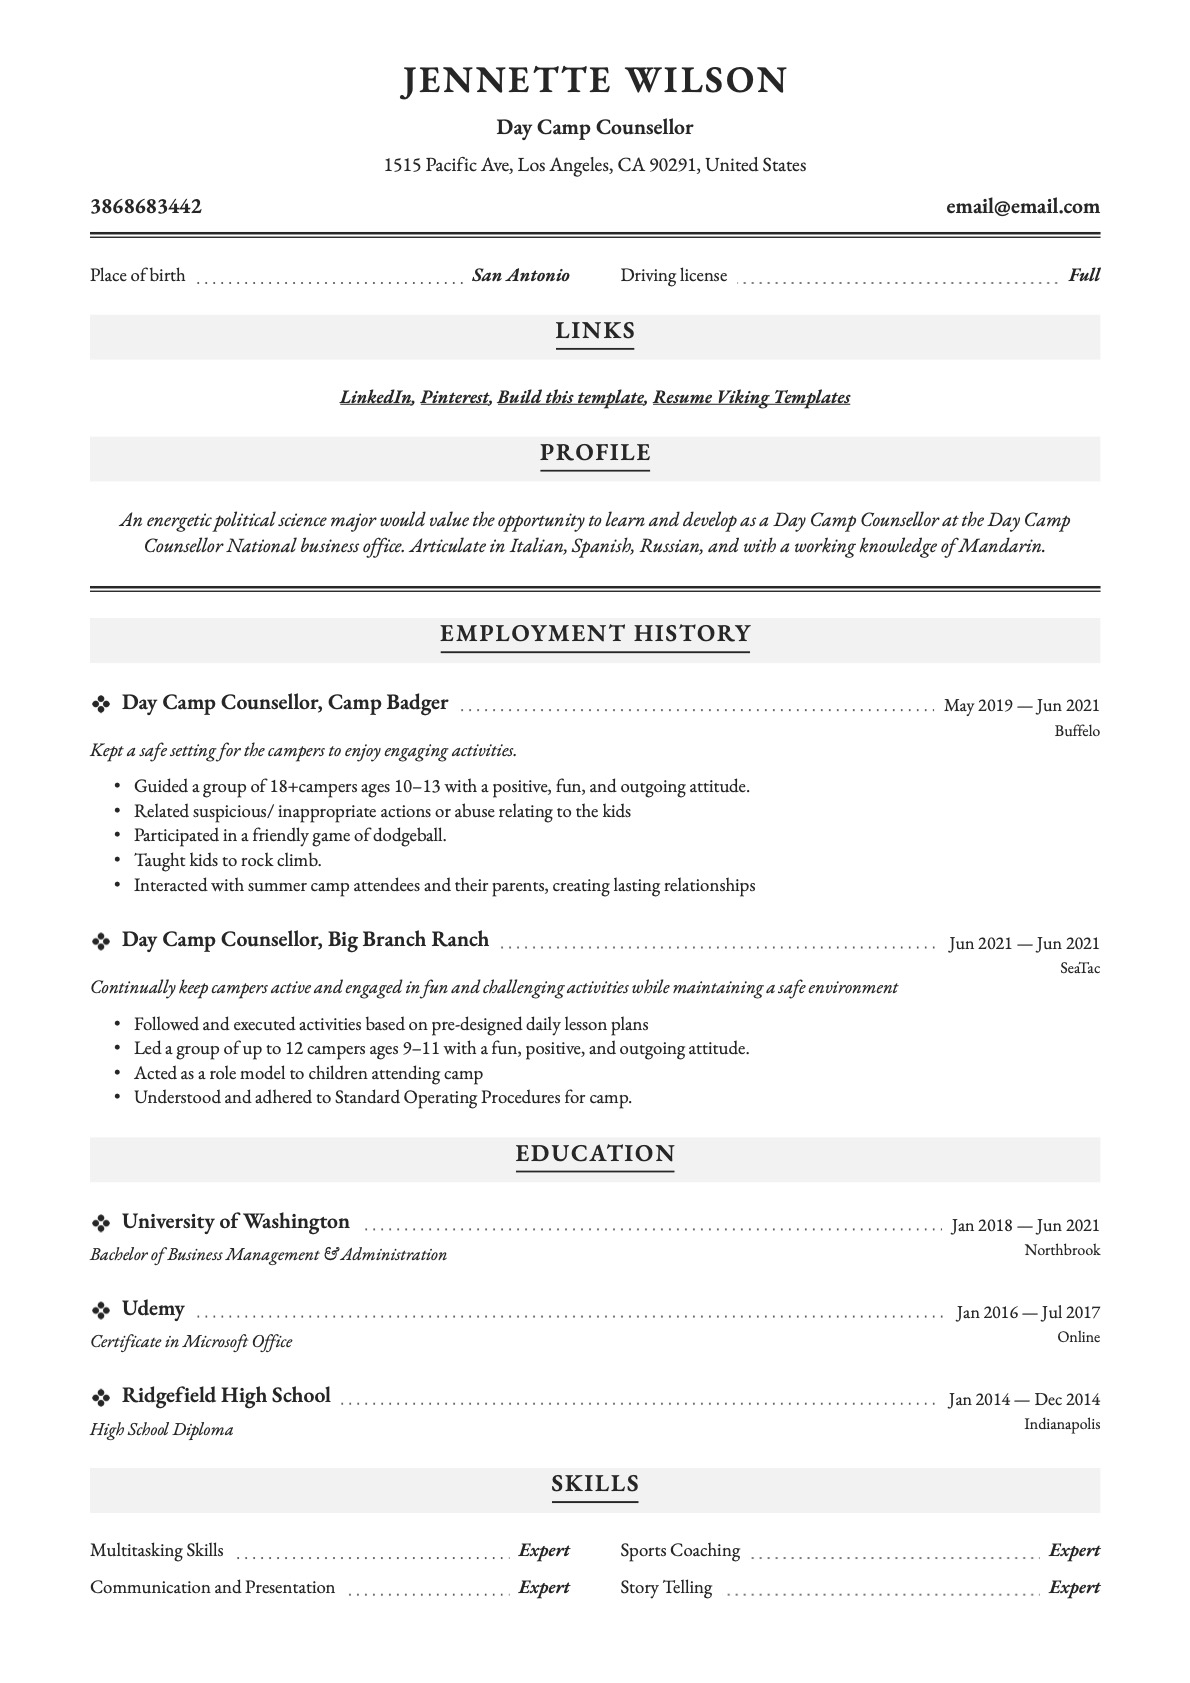 Day Camp Counselor Resume 